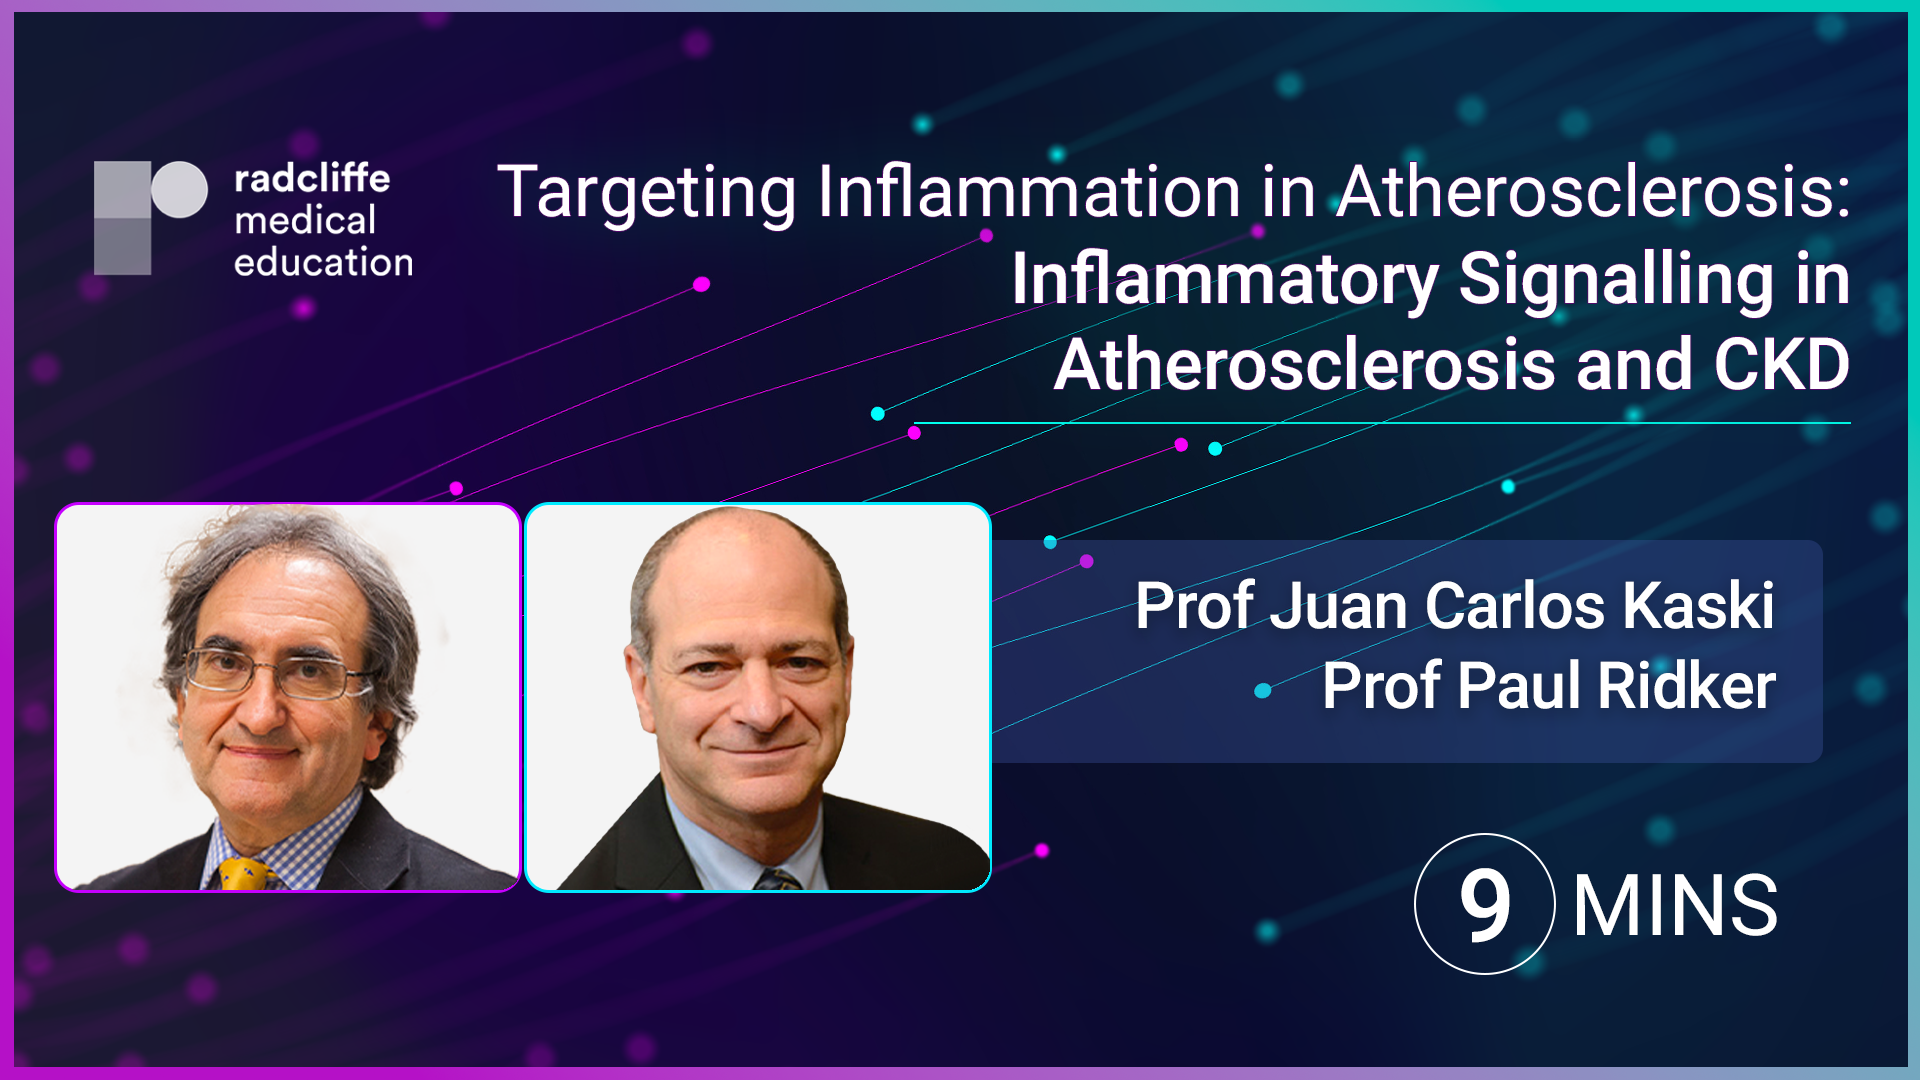 Targeting Inflammation in Atherosclerosis: Inflammatory Signalling in Atherosclerosis and CKD